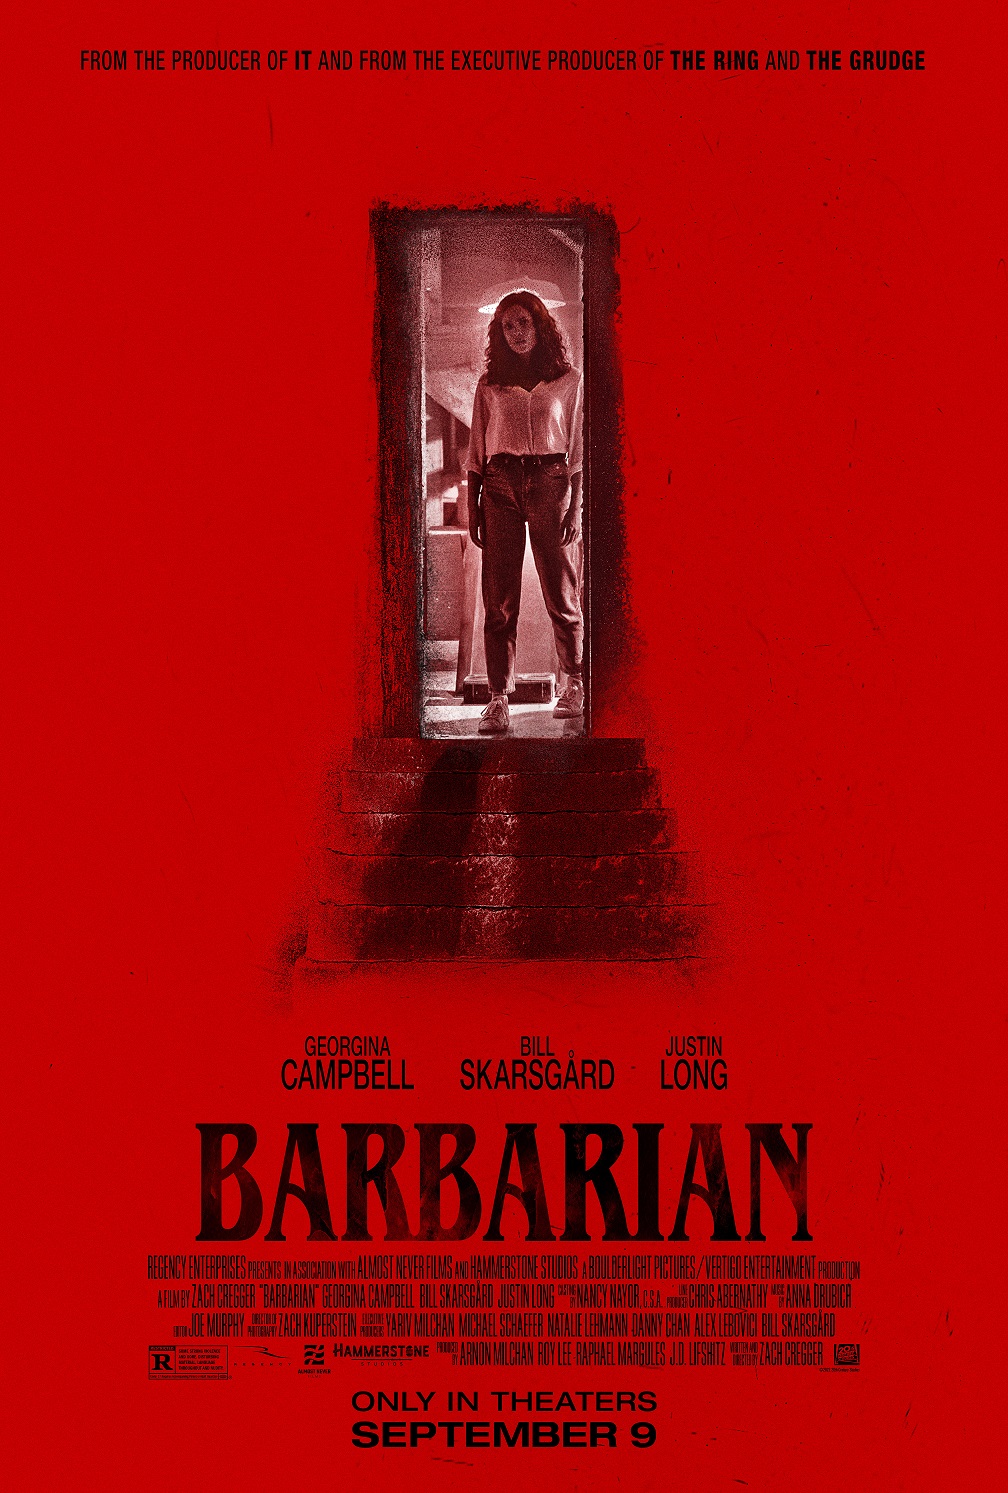 Barbarian Is The Most WTF Theatrical Release In 2022 So Far